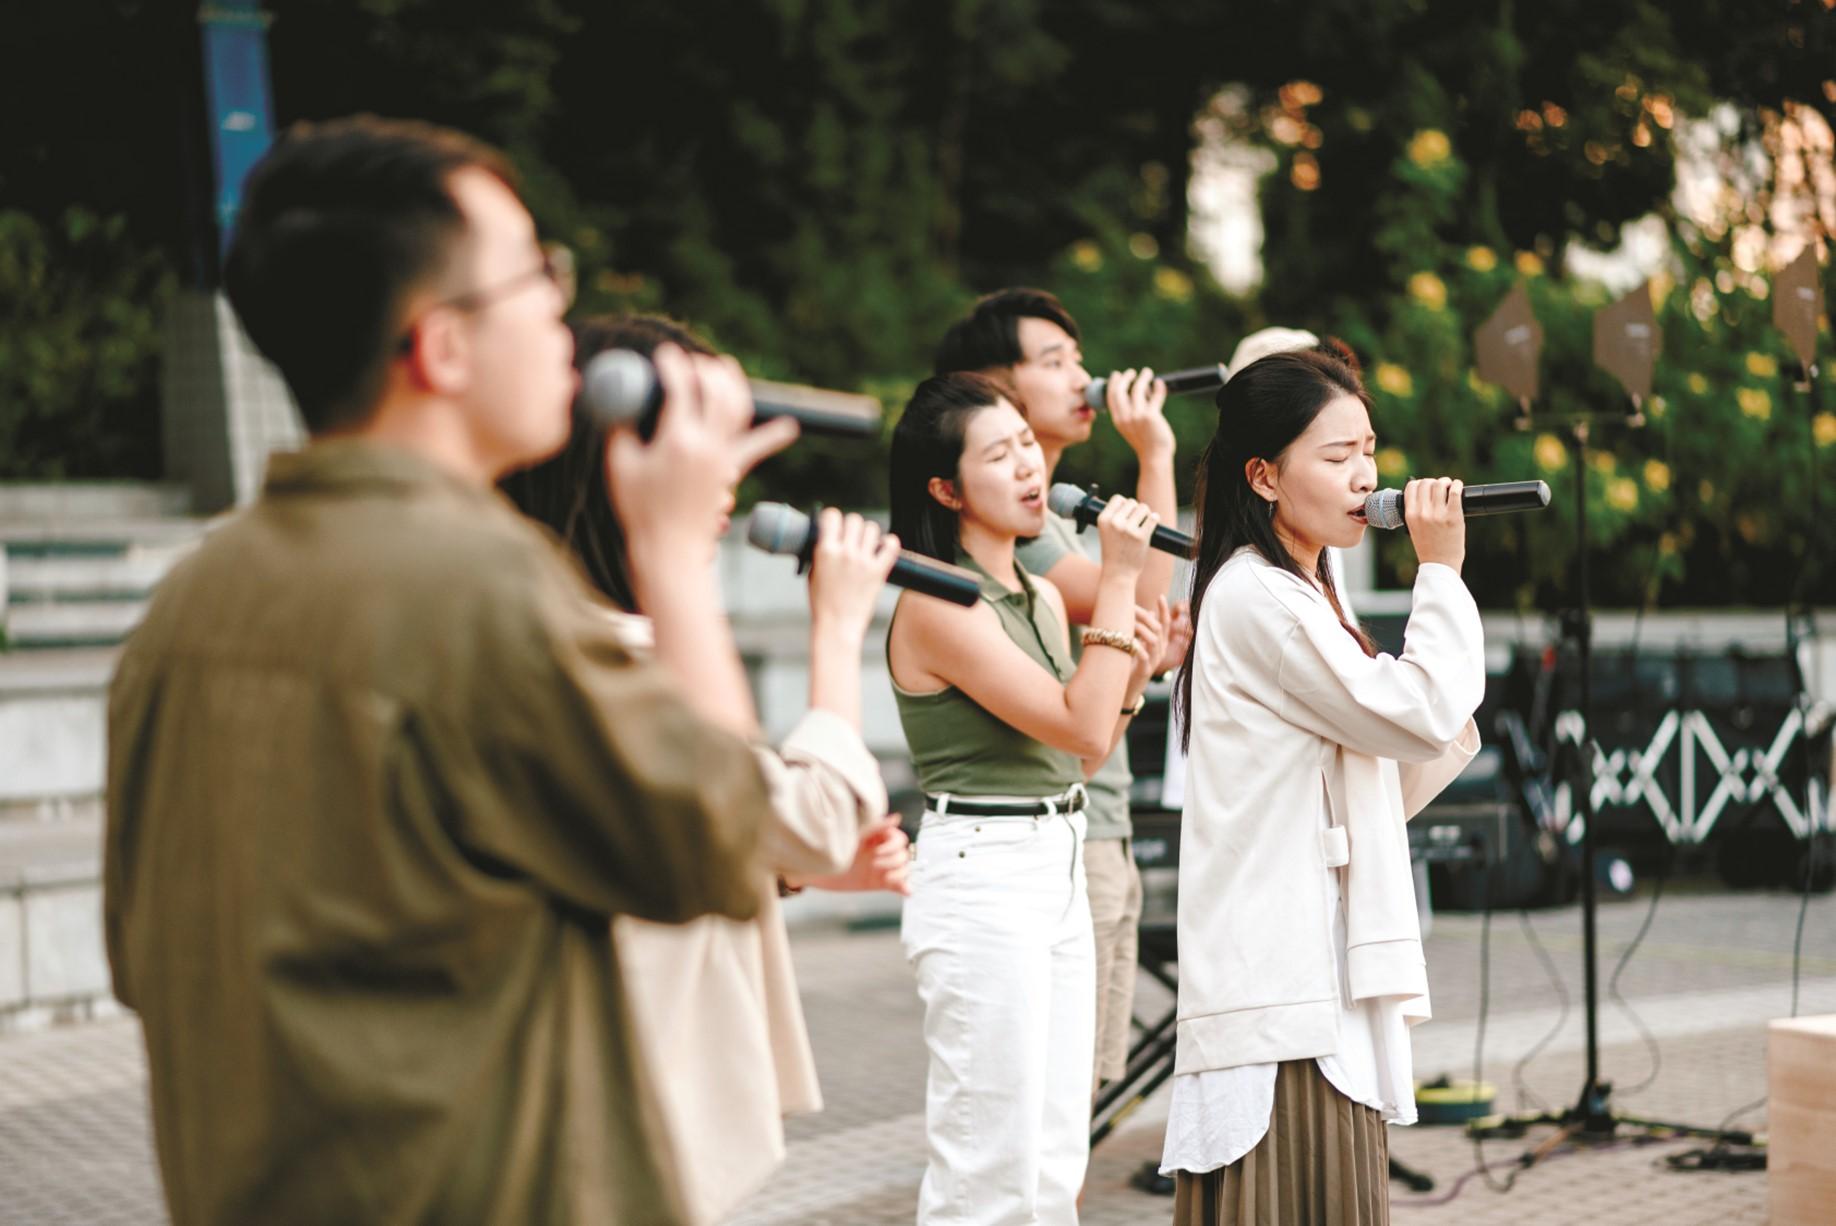 The Leisure and Cultural Services Department will present the Performing Arts Fun Day 2024 to be held at the Sha Tin Town Hall, the Tuen Mun Town Hall and the Tsuen Wan Town Hall from 2pm on May 12, 19 and June 2 (Sundays) respectively. Members of the public are welcome to visit and enjoy the performances and fringe activities presented by various talented local young artists and immerse themselves in the enchanting world of the performing arts. A cappella group Boonfaysau will perform both original and arranged works of different styles at the Performing Arts Fun Day 2024.